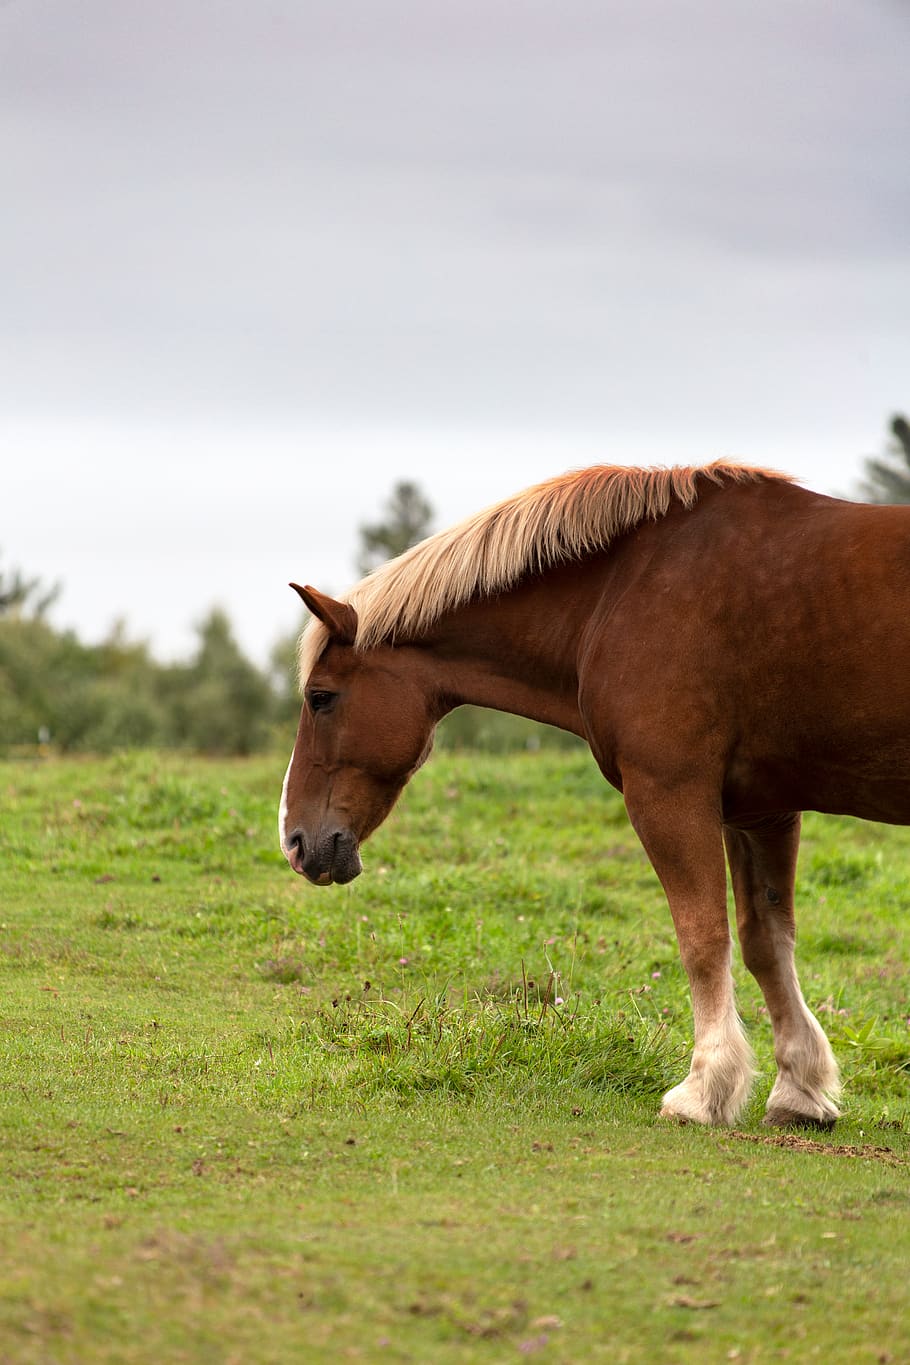 horse, animal, countryside, equine, farm, field, grass, outdoors, rural, nature